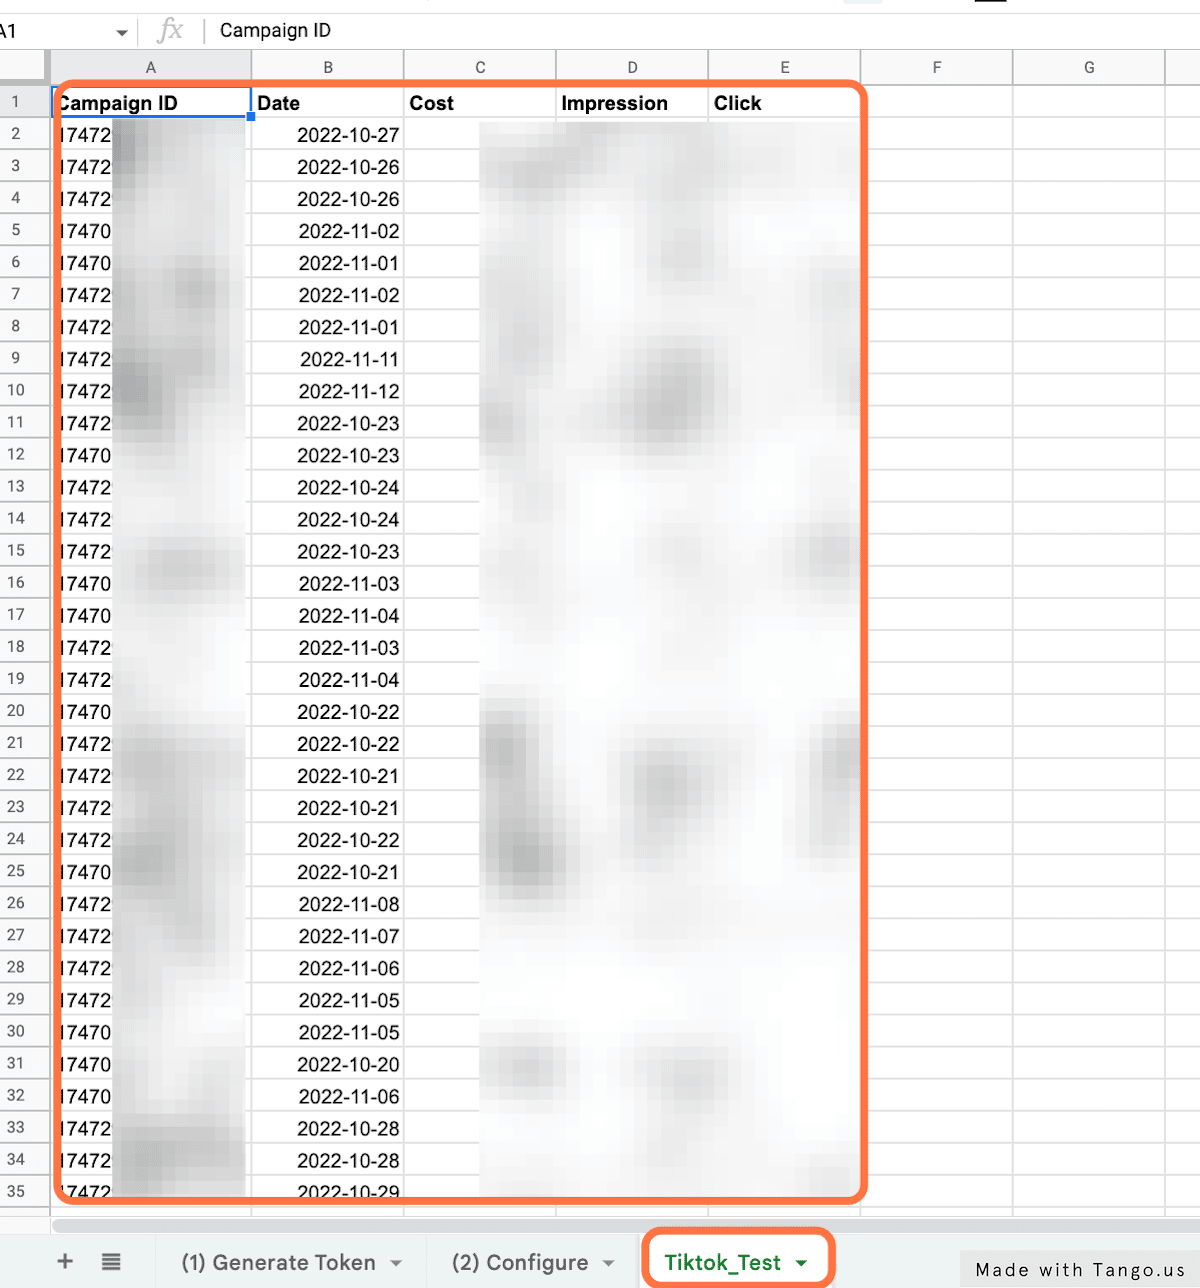 Sample report generated by the Google Sheets to extract TikTok Ads data created by Marketyze.